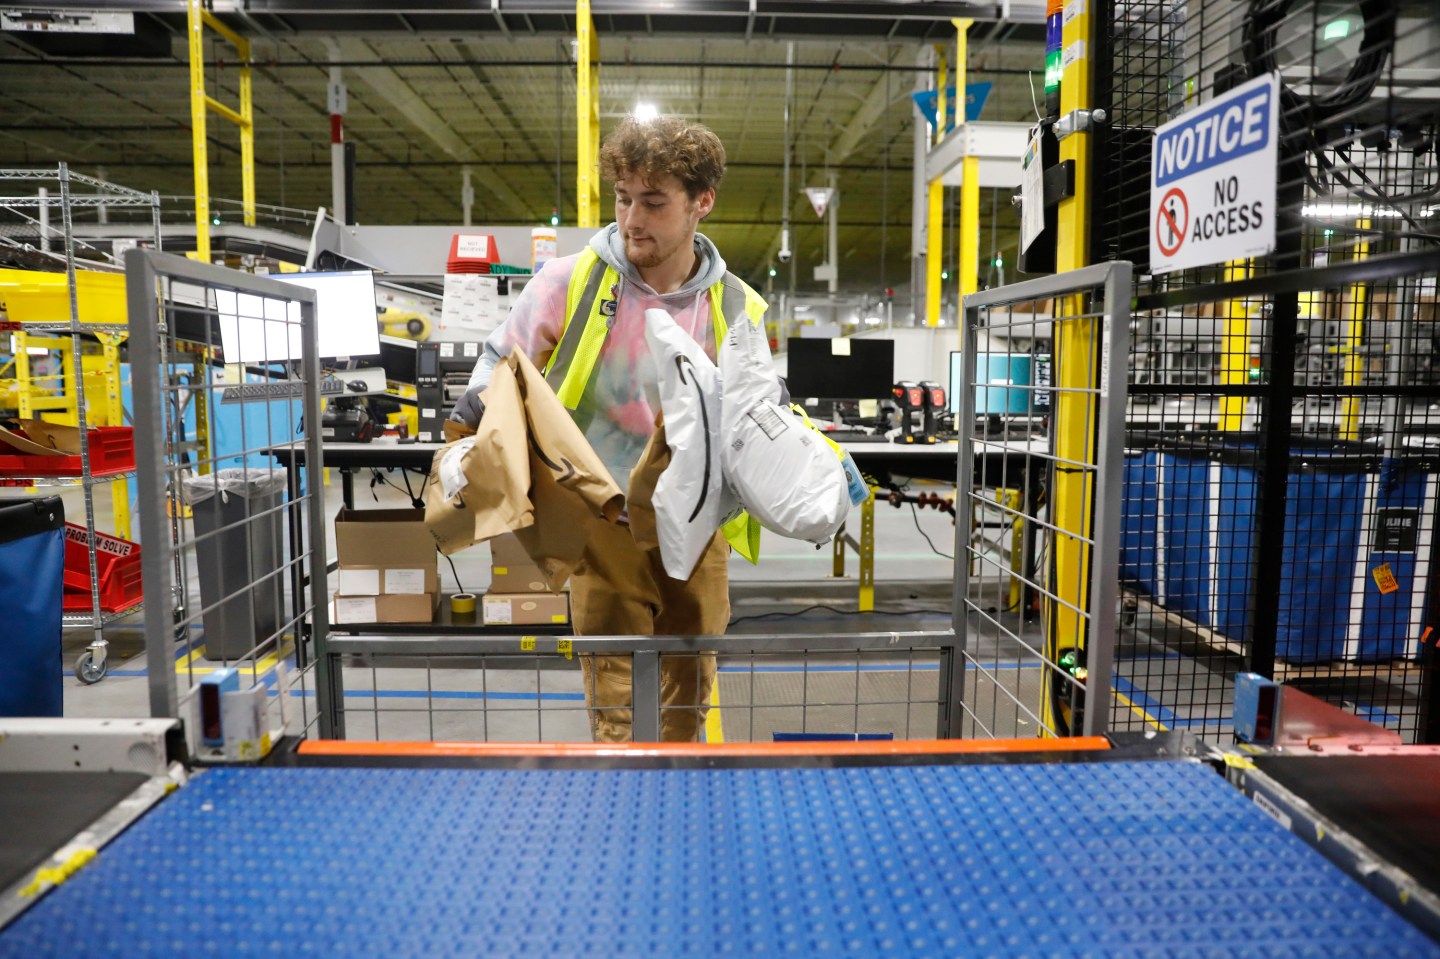 TAMPA, FLORIDA &#8211; NOVEMBER 27: Amazon associate Zachary Binder works to ship out same day orders during Cyber Monday at the Same-Day Delivery Facility Fulfillment Center on November 27, 2023 in Tampa, Florida. Dedicated to online shopping, Cyber Monday is one of Amazon&#8217;s busiest days following Thanksgiving, marked by retailers providing substantial discounts and promotions. (Photo by Octavio Jones/Getty Images)